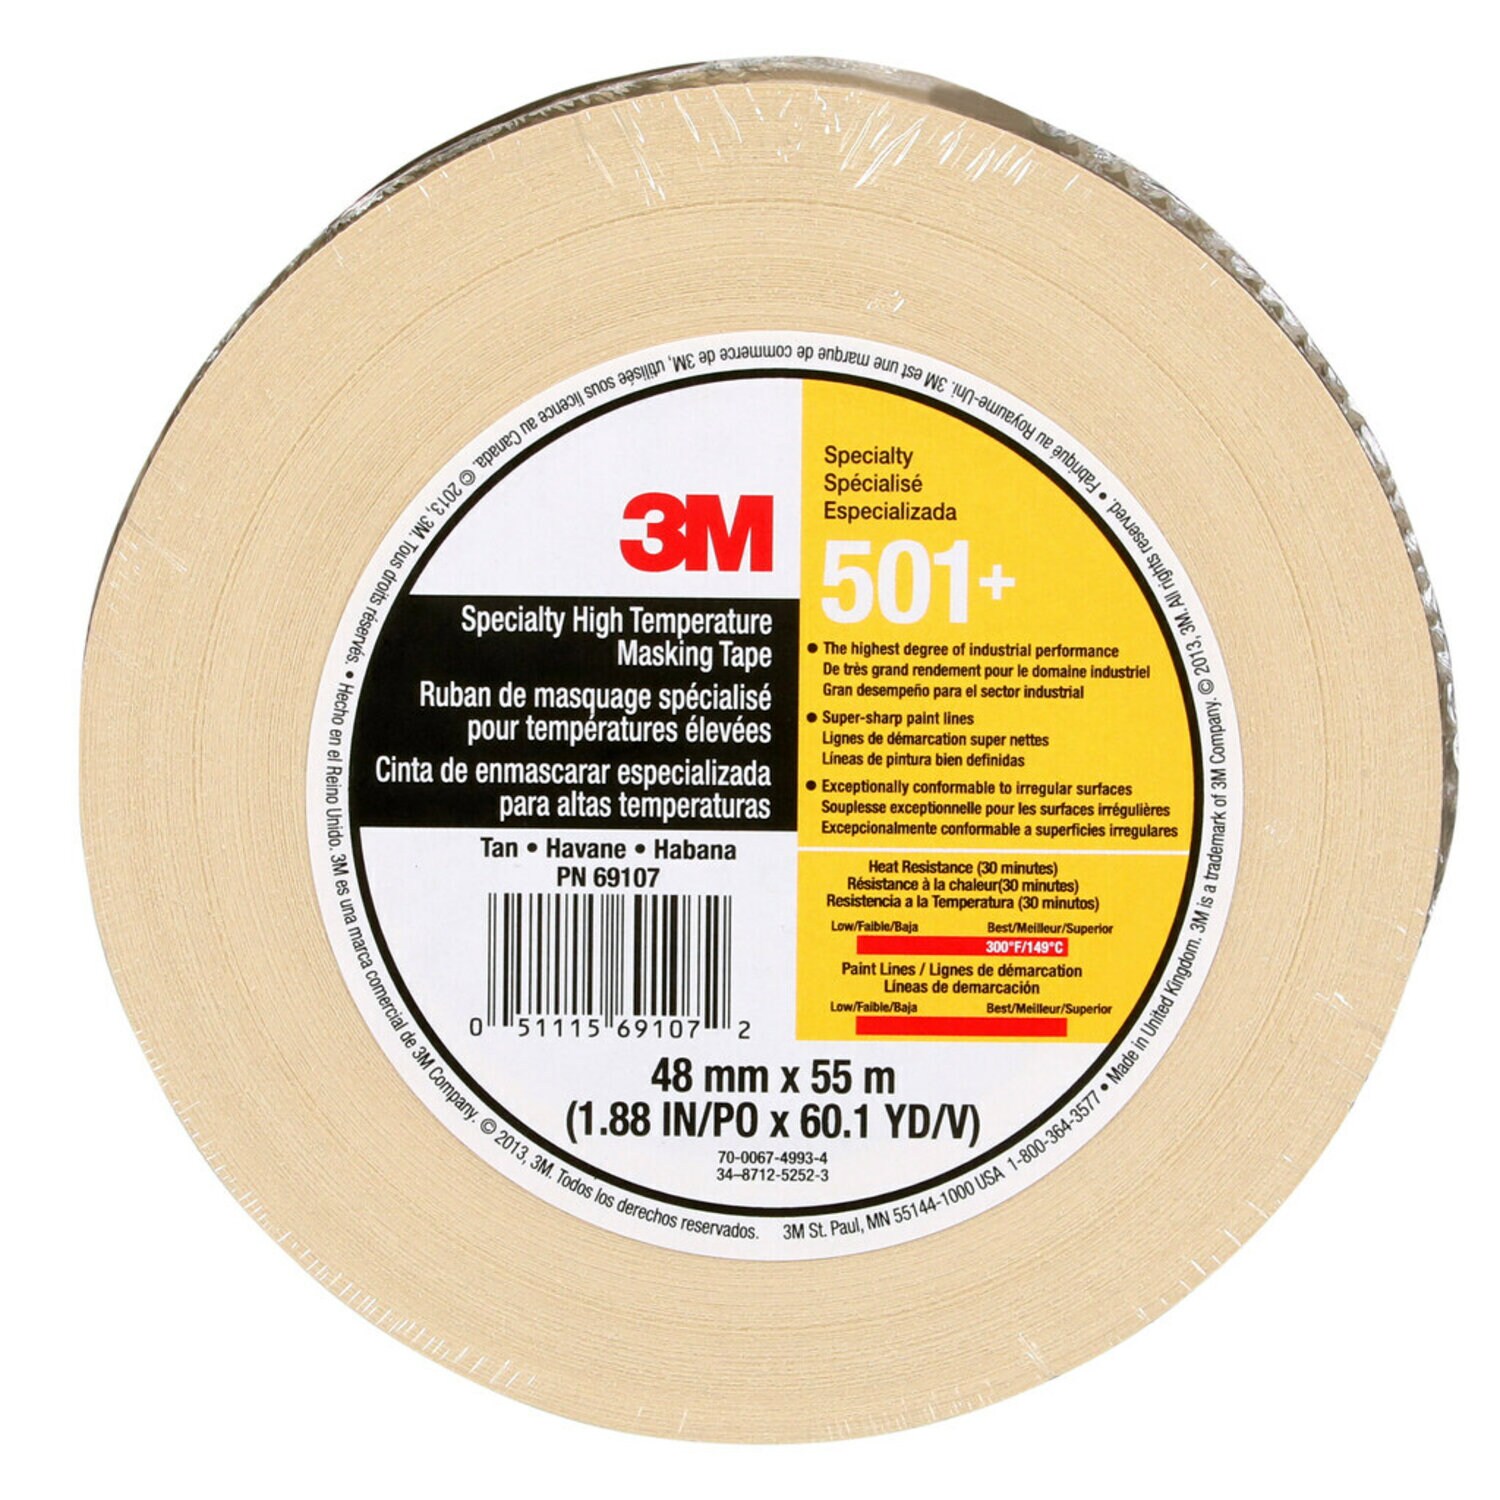 7010335156 - 3M Specialty High Temperature Masking Tape 501+, Tan, 48 mm x 55 m,
24/Case, Individually Wrapped Conveniently Packaged